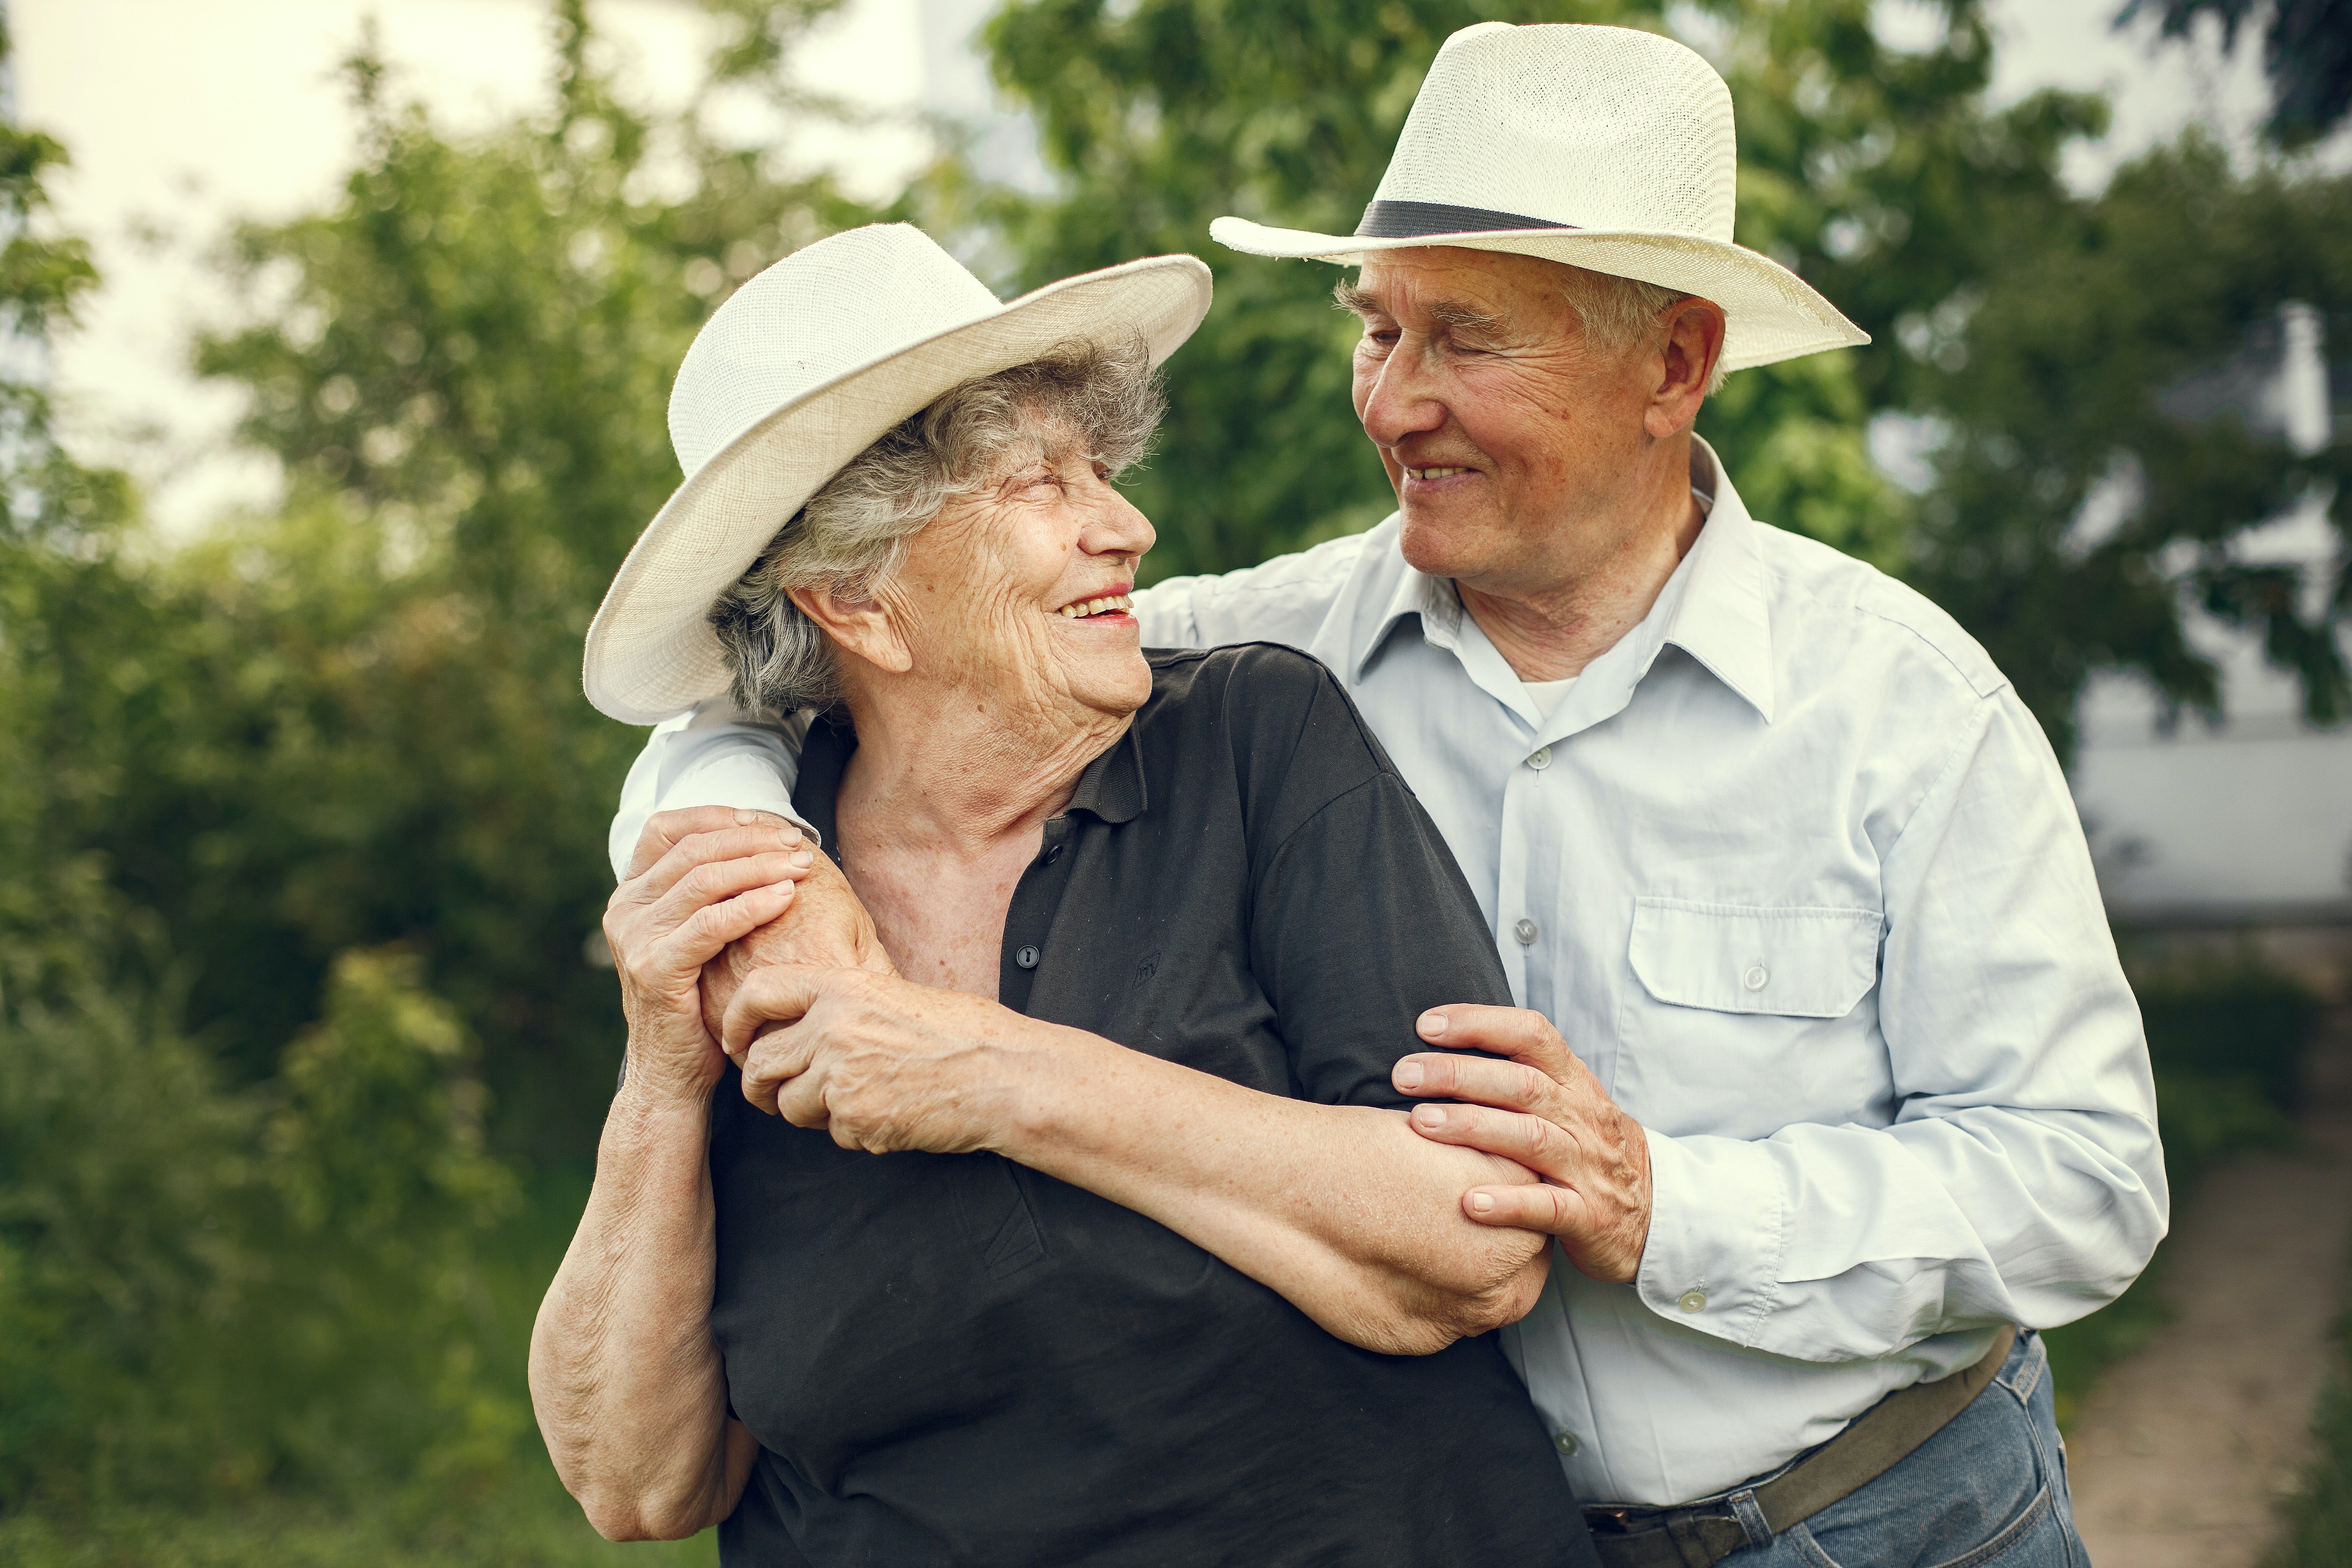 The old couple had enjoyed 40 years of marital bliss. | Photo: Pexels